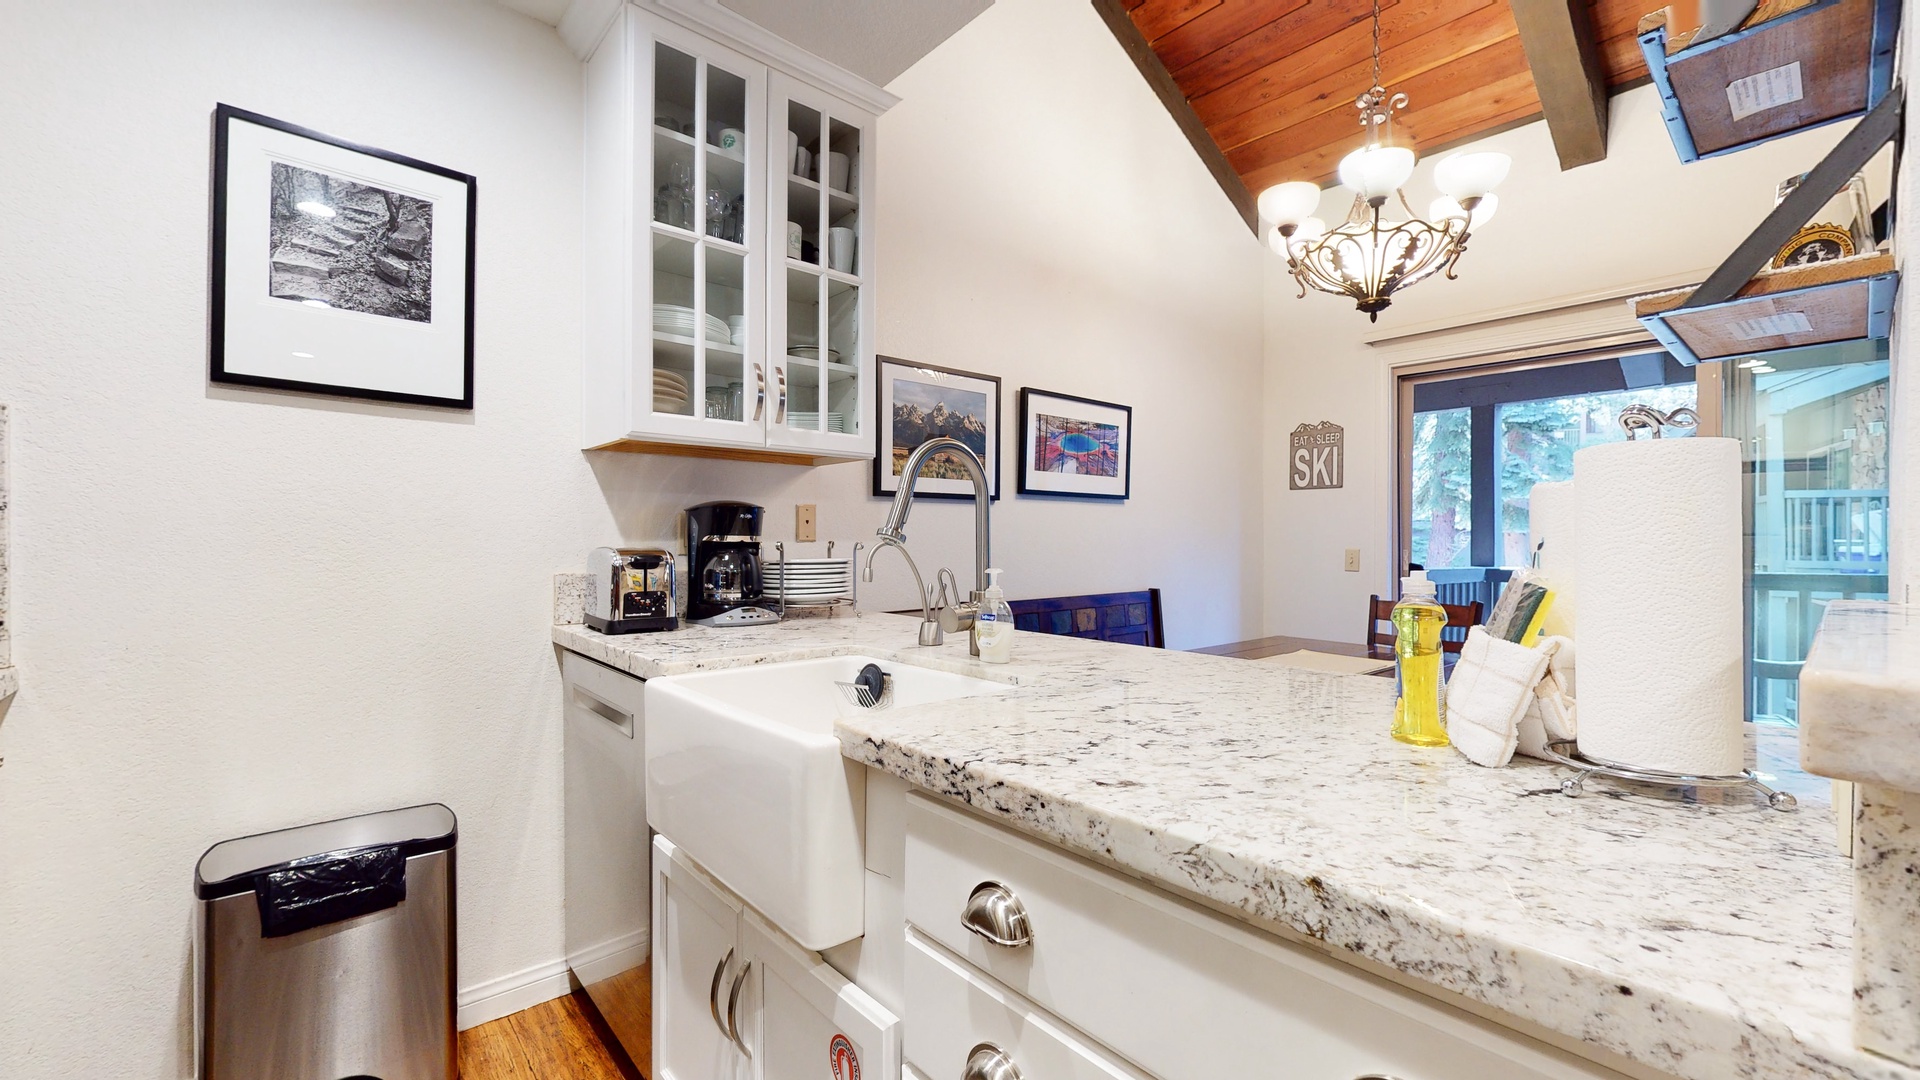 Kitchen with toaster, drip coffee maker, blende, and more